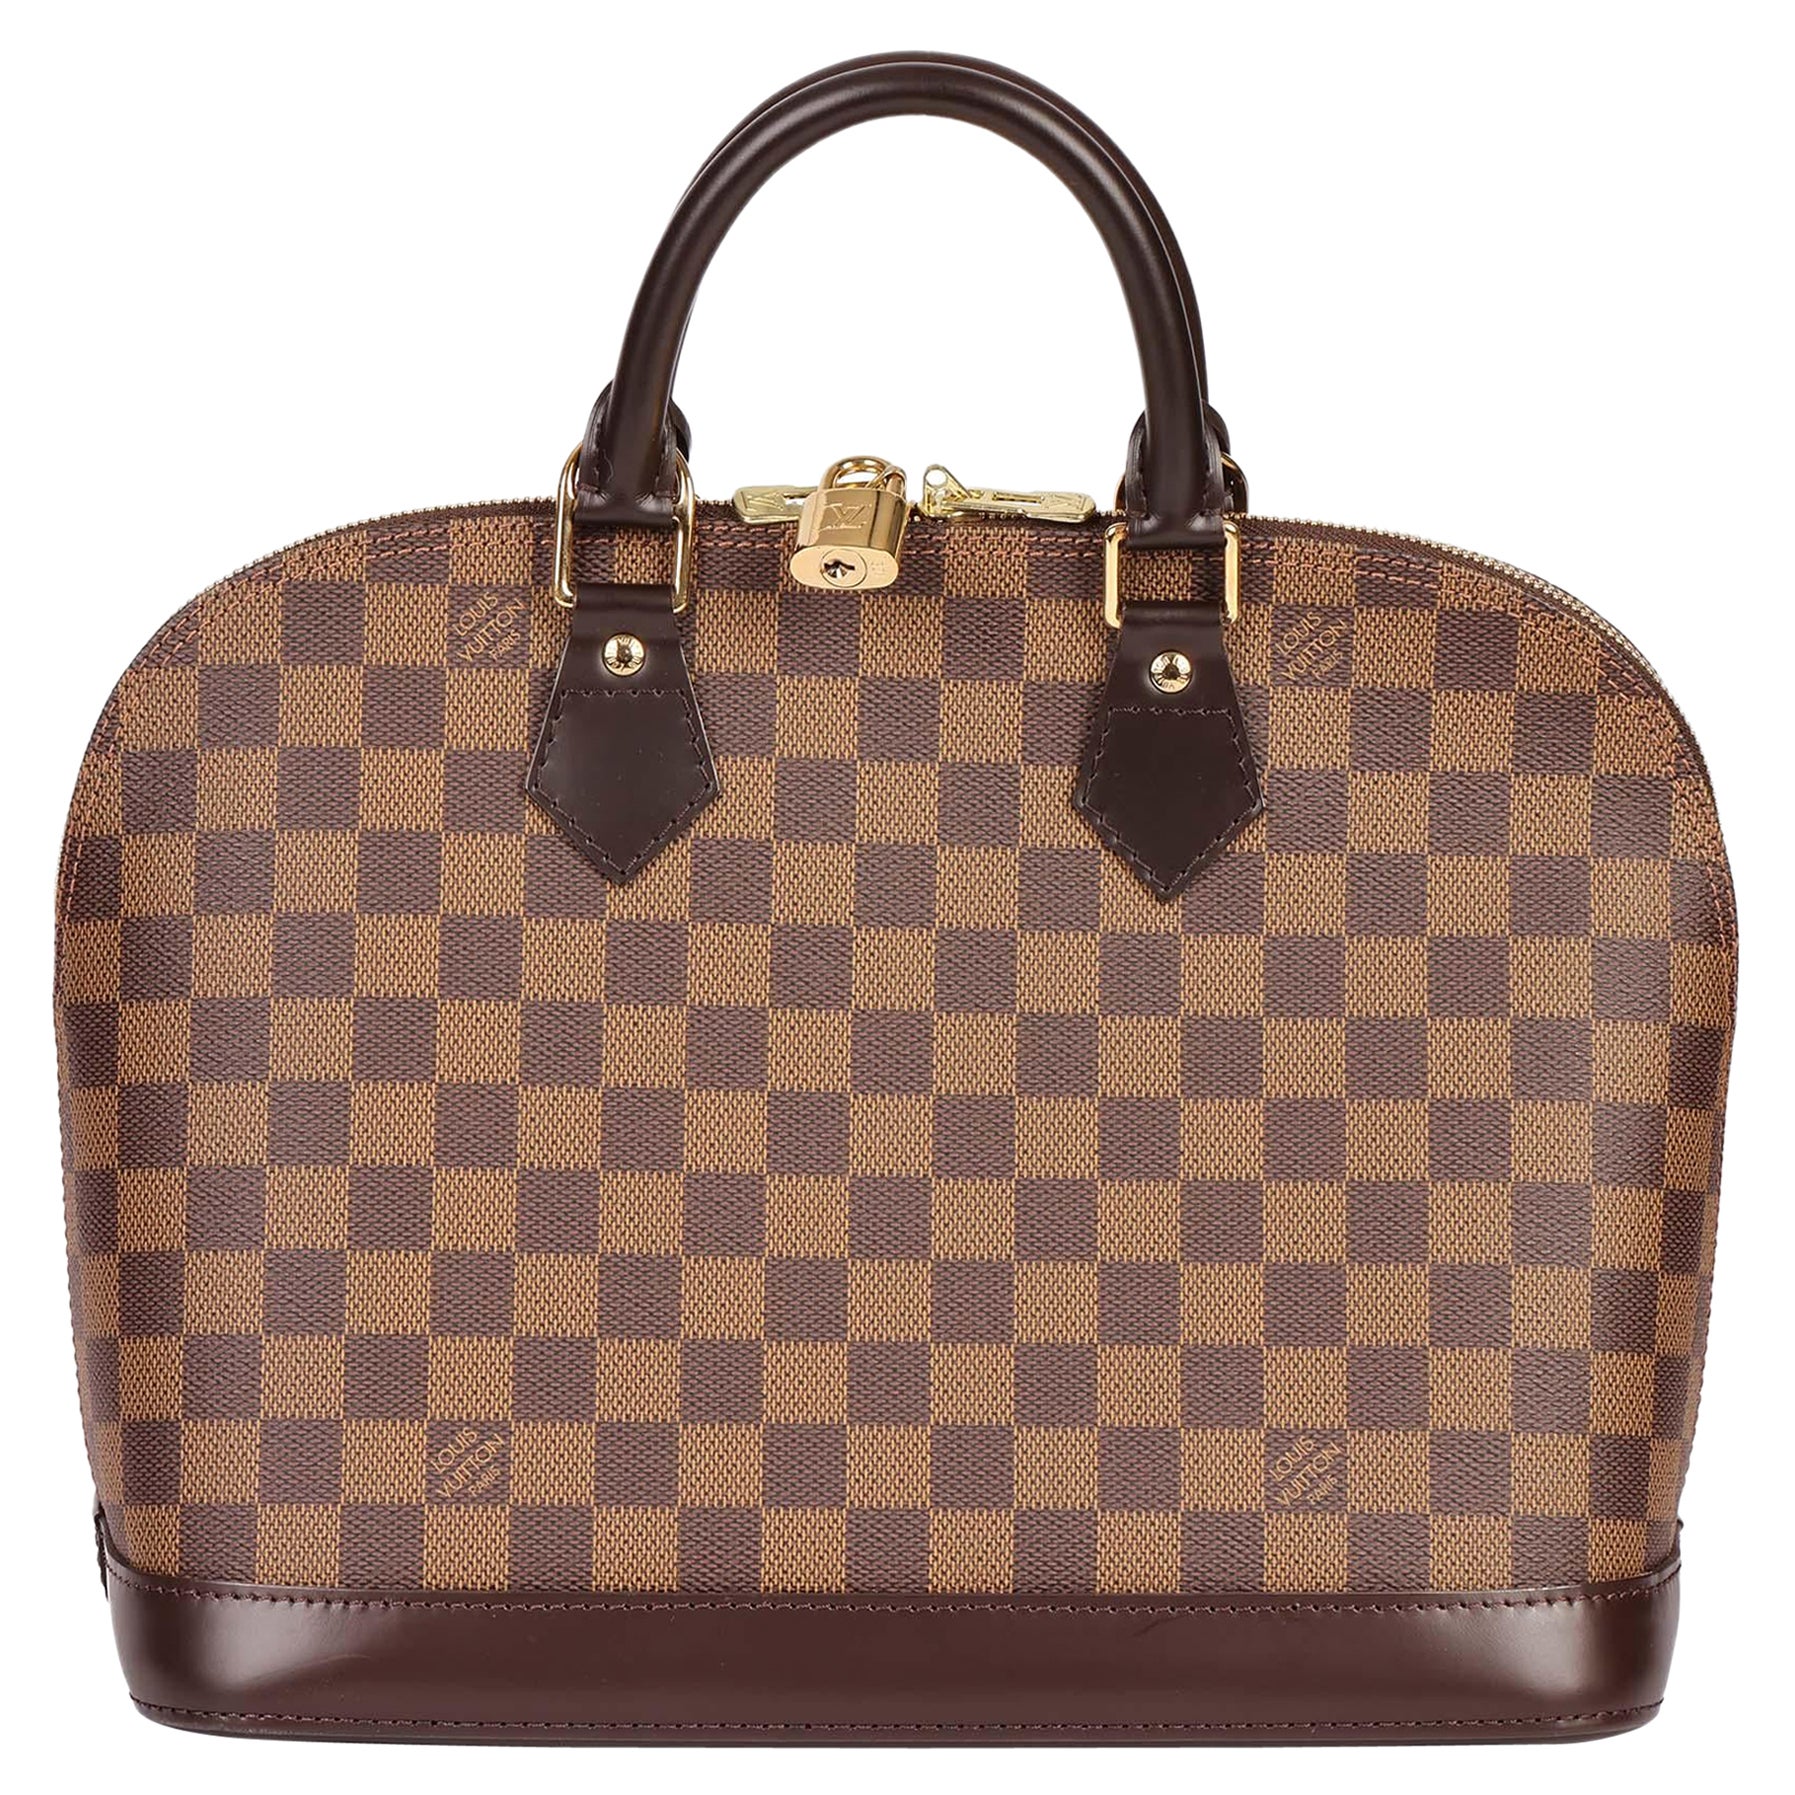 Louis Vuitton - Designer Biography and Price History on 1stDibs | 4428, "louis  vuitton" "marc jacobs"